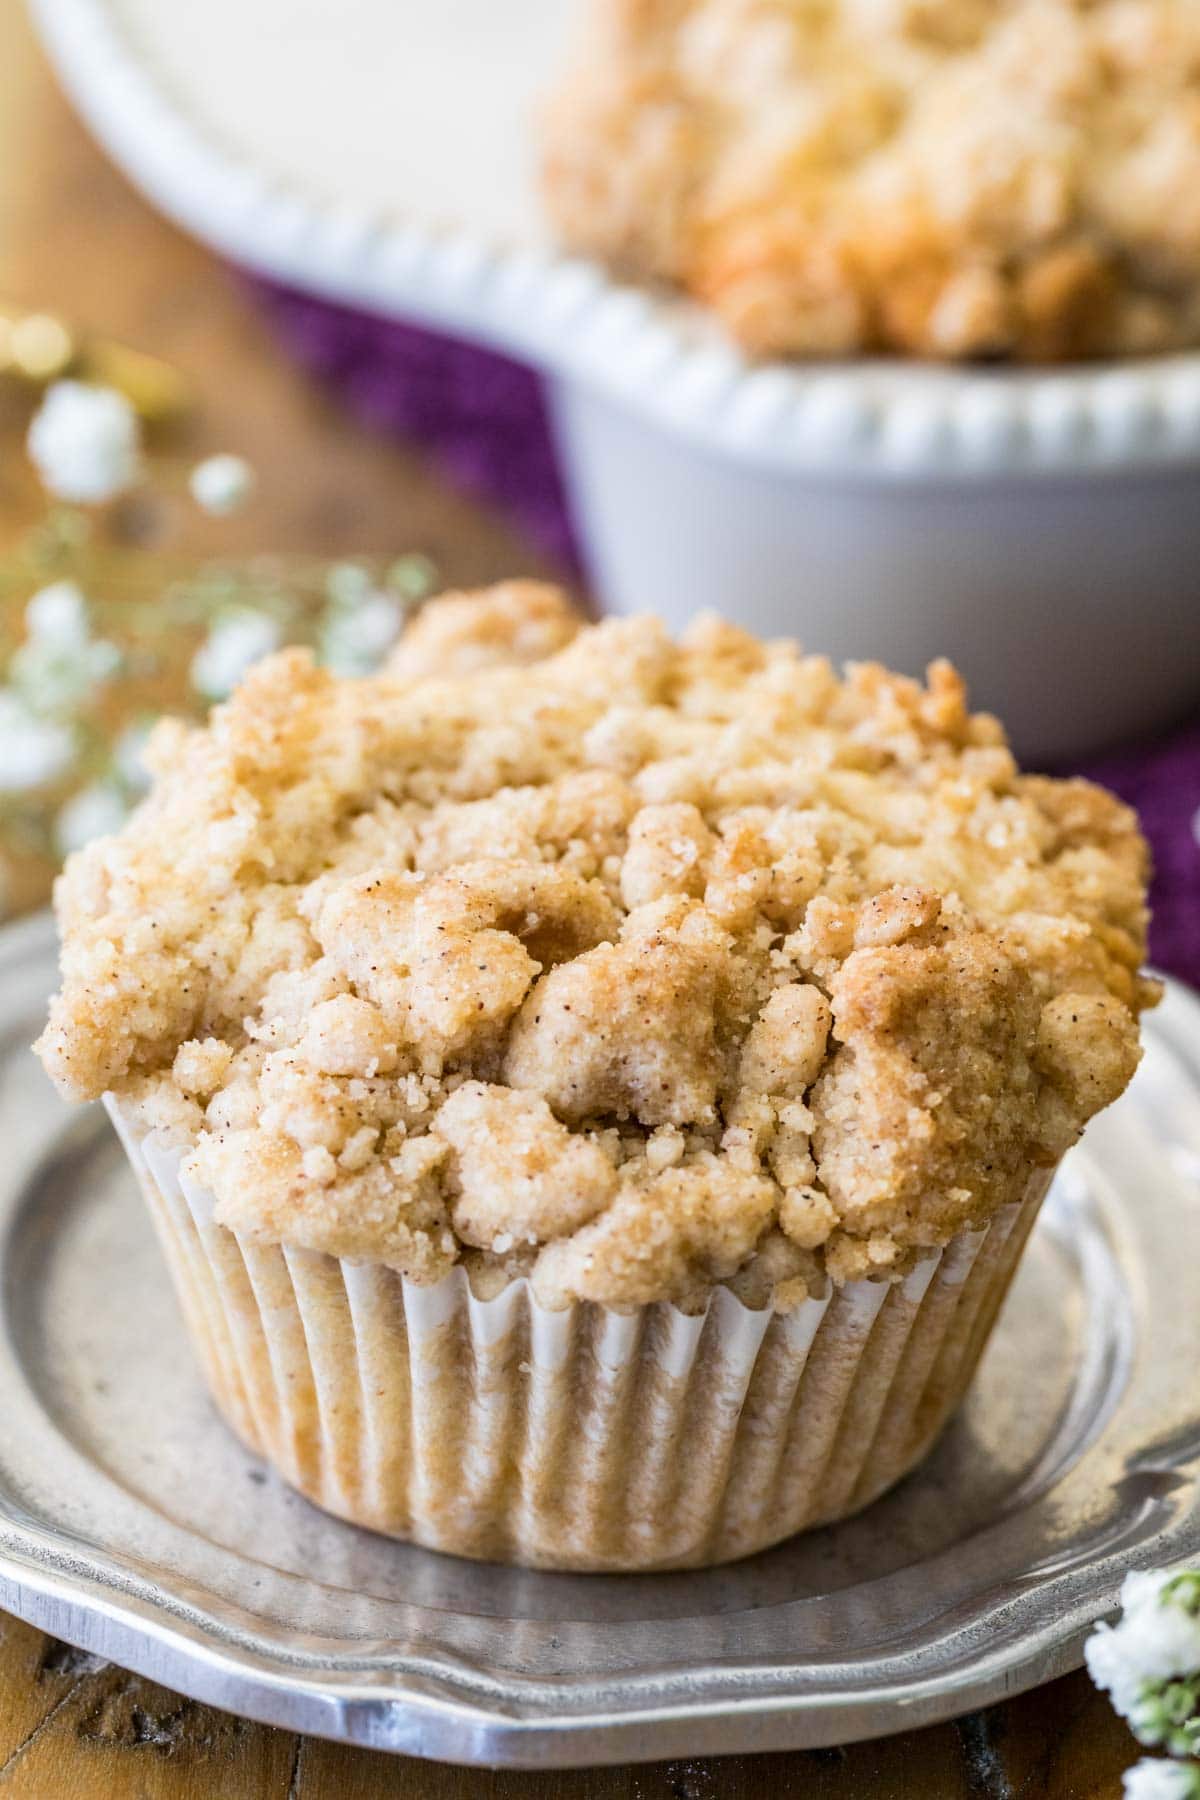 What is the difference between a crumb topping and a streusel?